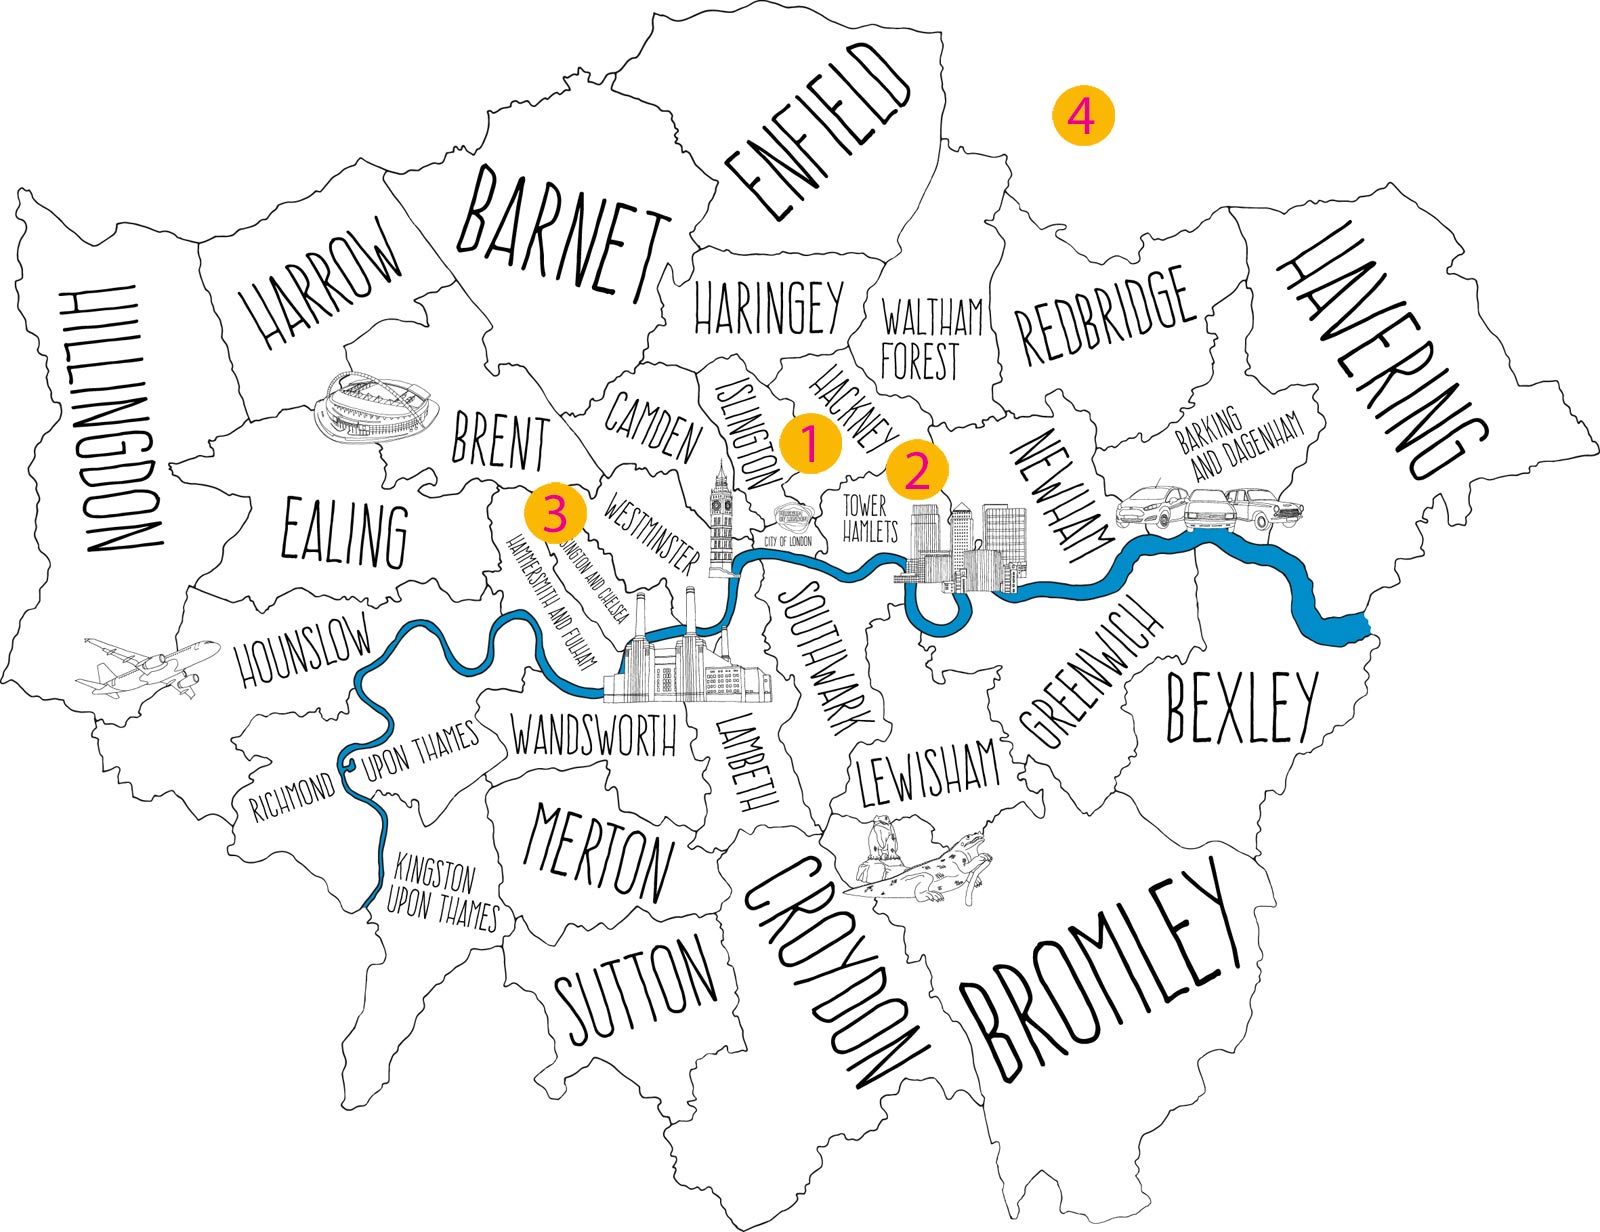 A map of London showing four different Curating London projects across the city.